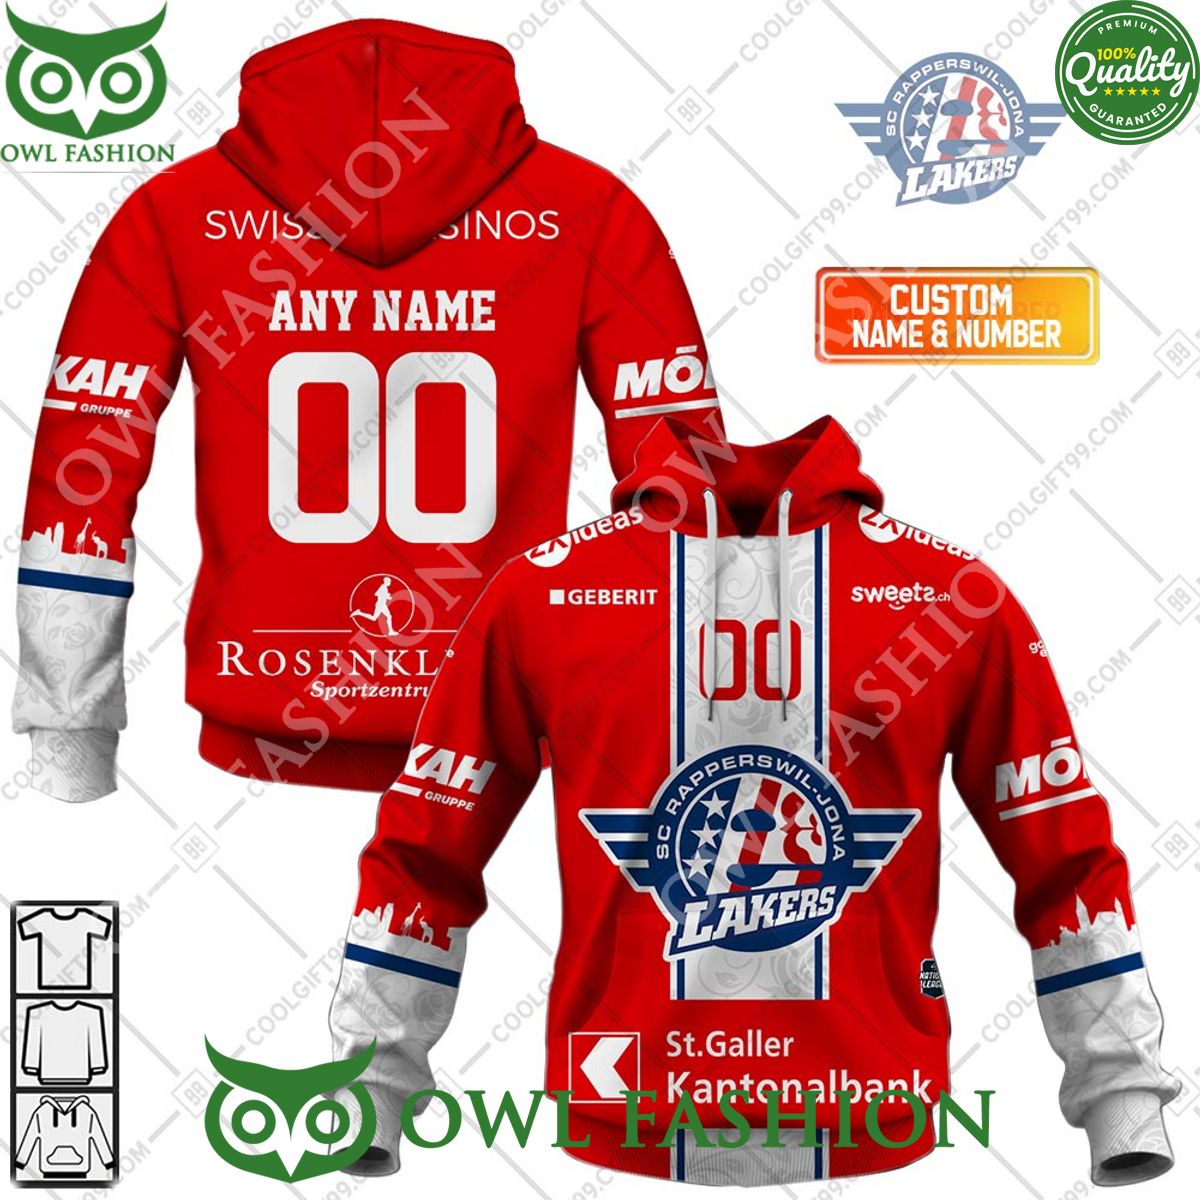 personalized name and number nl hockey scrj lakers home jersey style printed hoodie shirt 1 zalvV.jpg